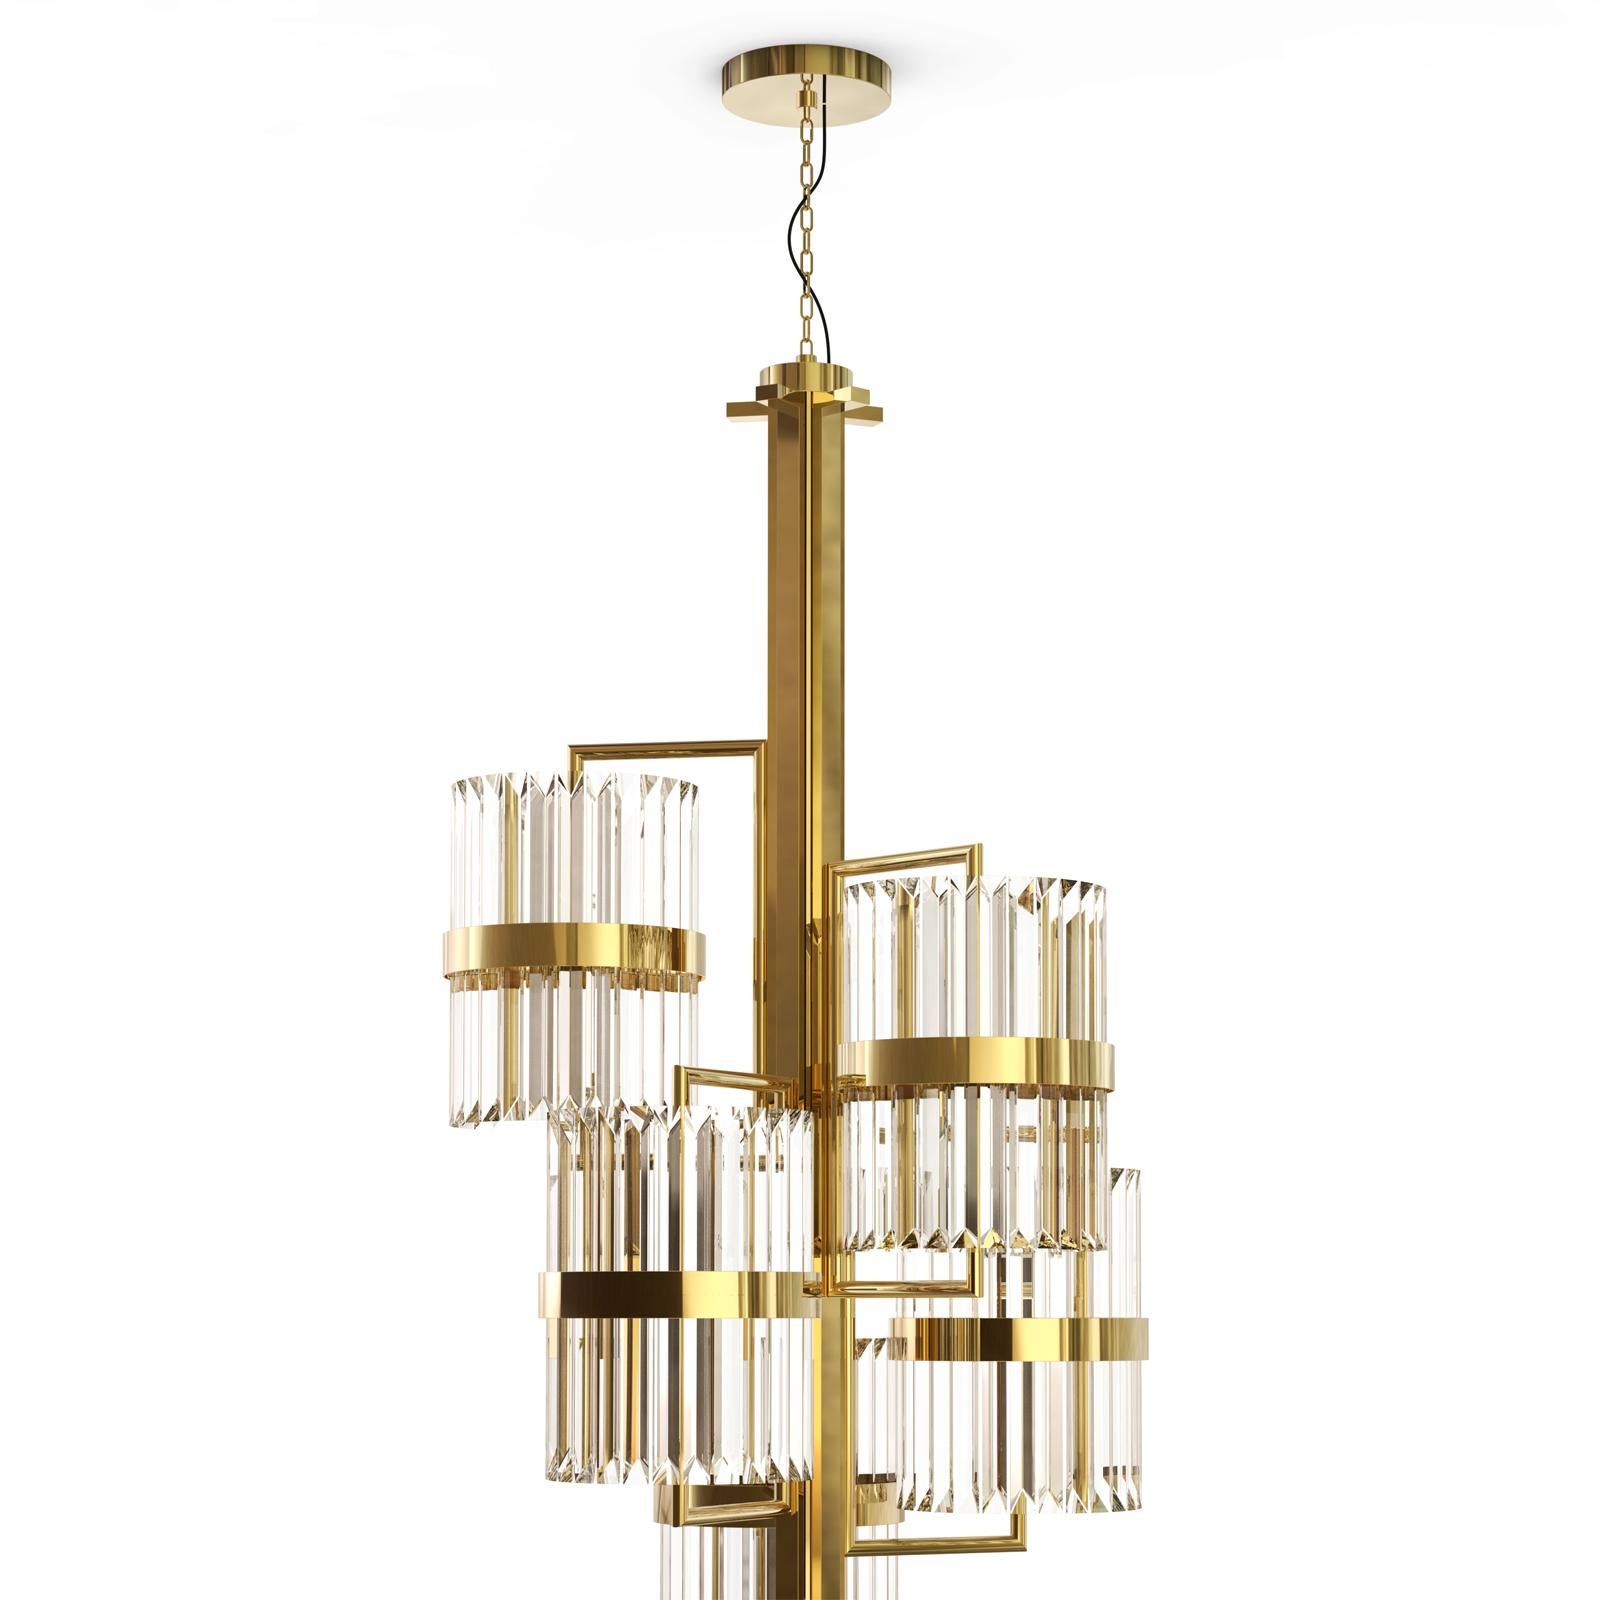 Chandelier Freeone with Crystal glass cylinders with gold plated
structure. With 40 bulbs, lamp holder type G9, 40Watt max.
Voltage: 220-240. Bulbs not included.